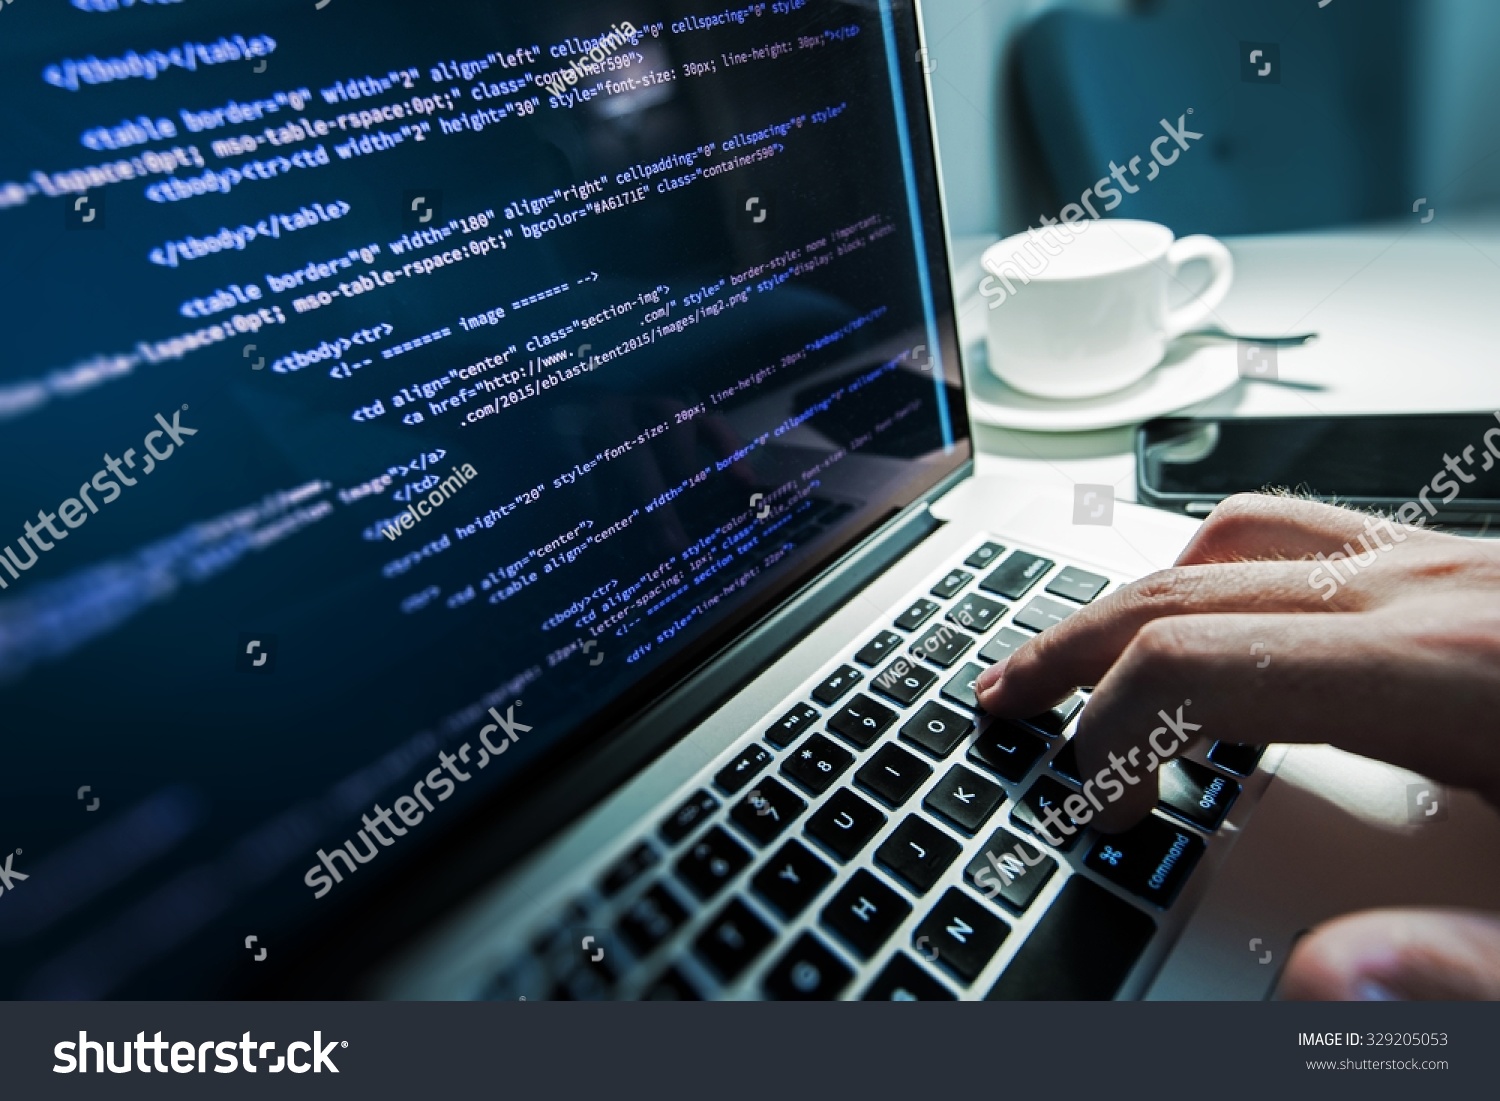 Programming Work Time. Programmer Typing New Lines of HTML Code. Laptop and Hand Closeup. Working Time. Web Design Business Concept. #329205053